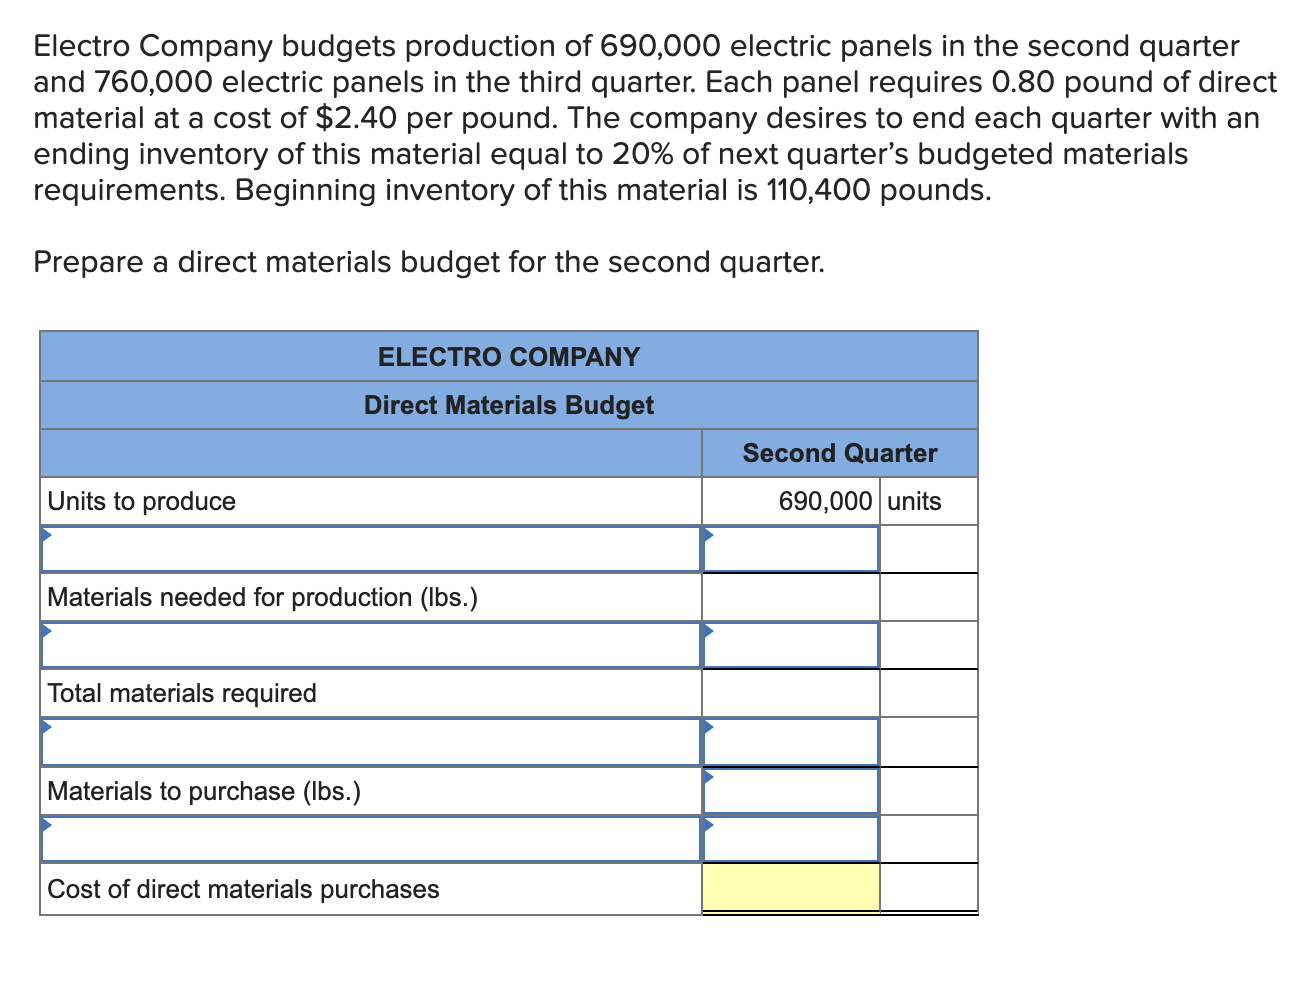 Solved Electro Company budgets production of 690,000